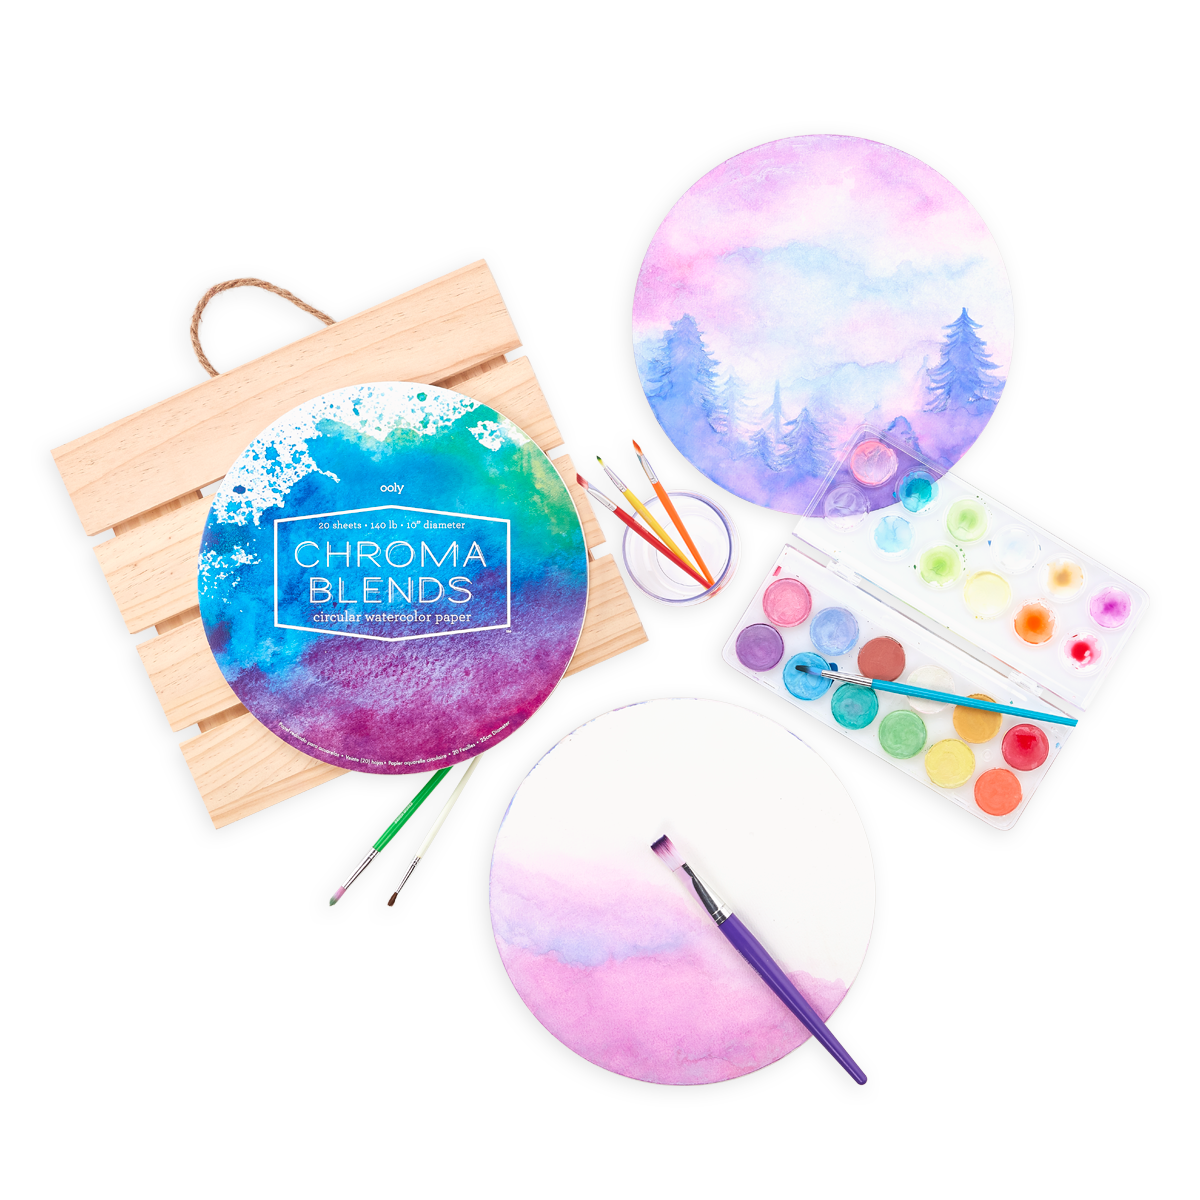 Chroma Blends Circular Watercolor Paper with watercolor tools including paint brushes and paint set